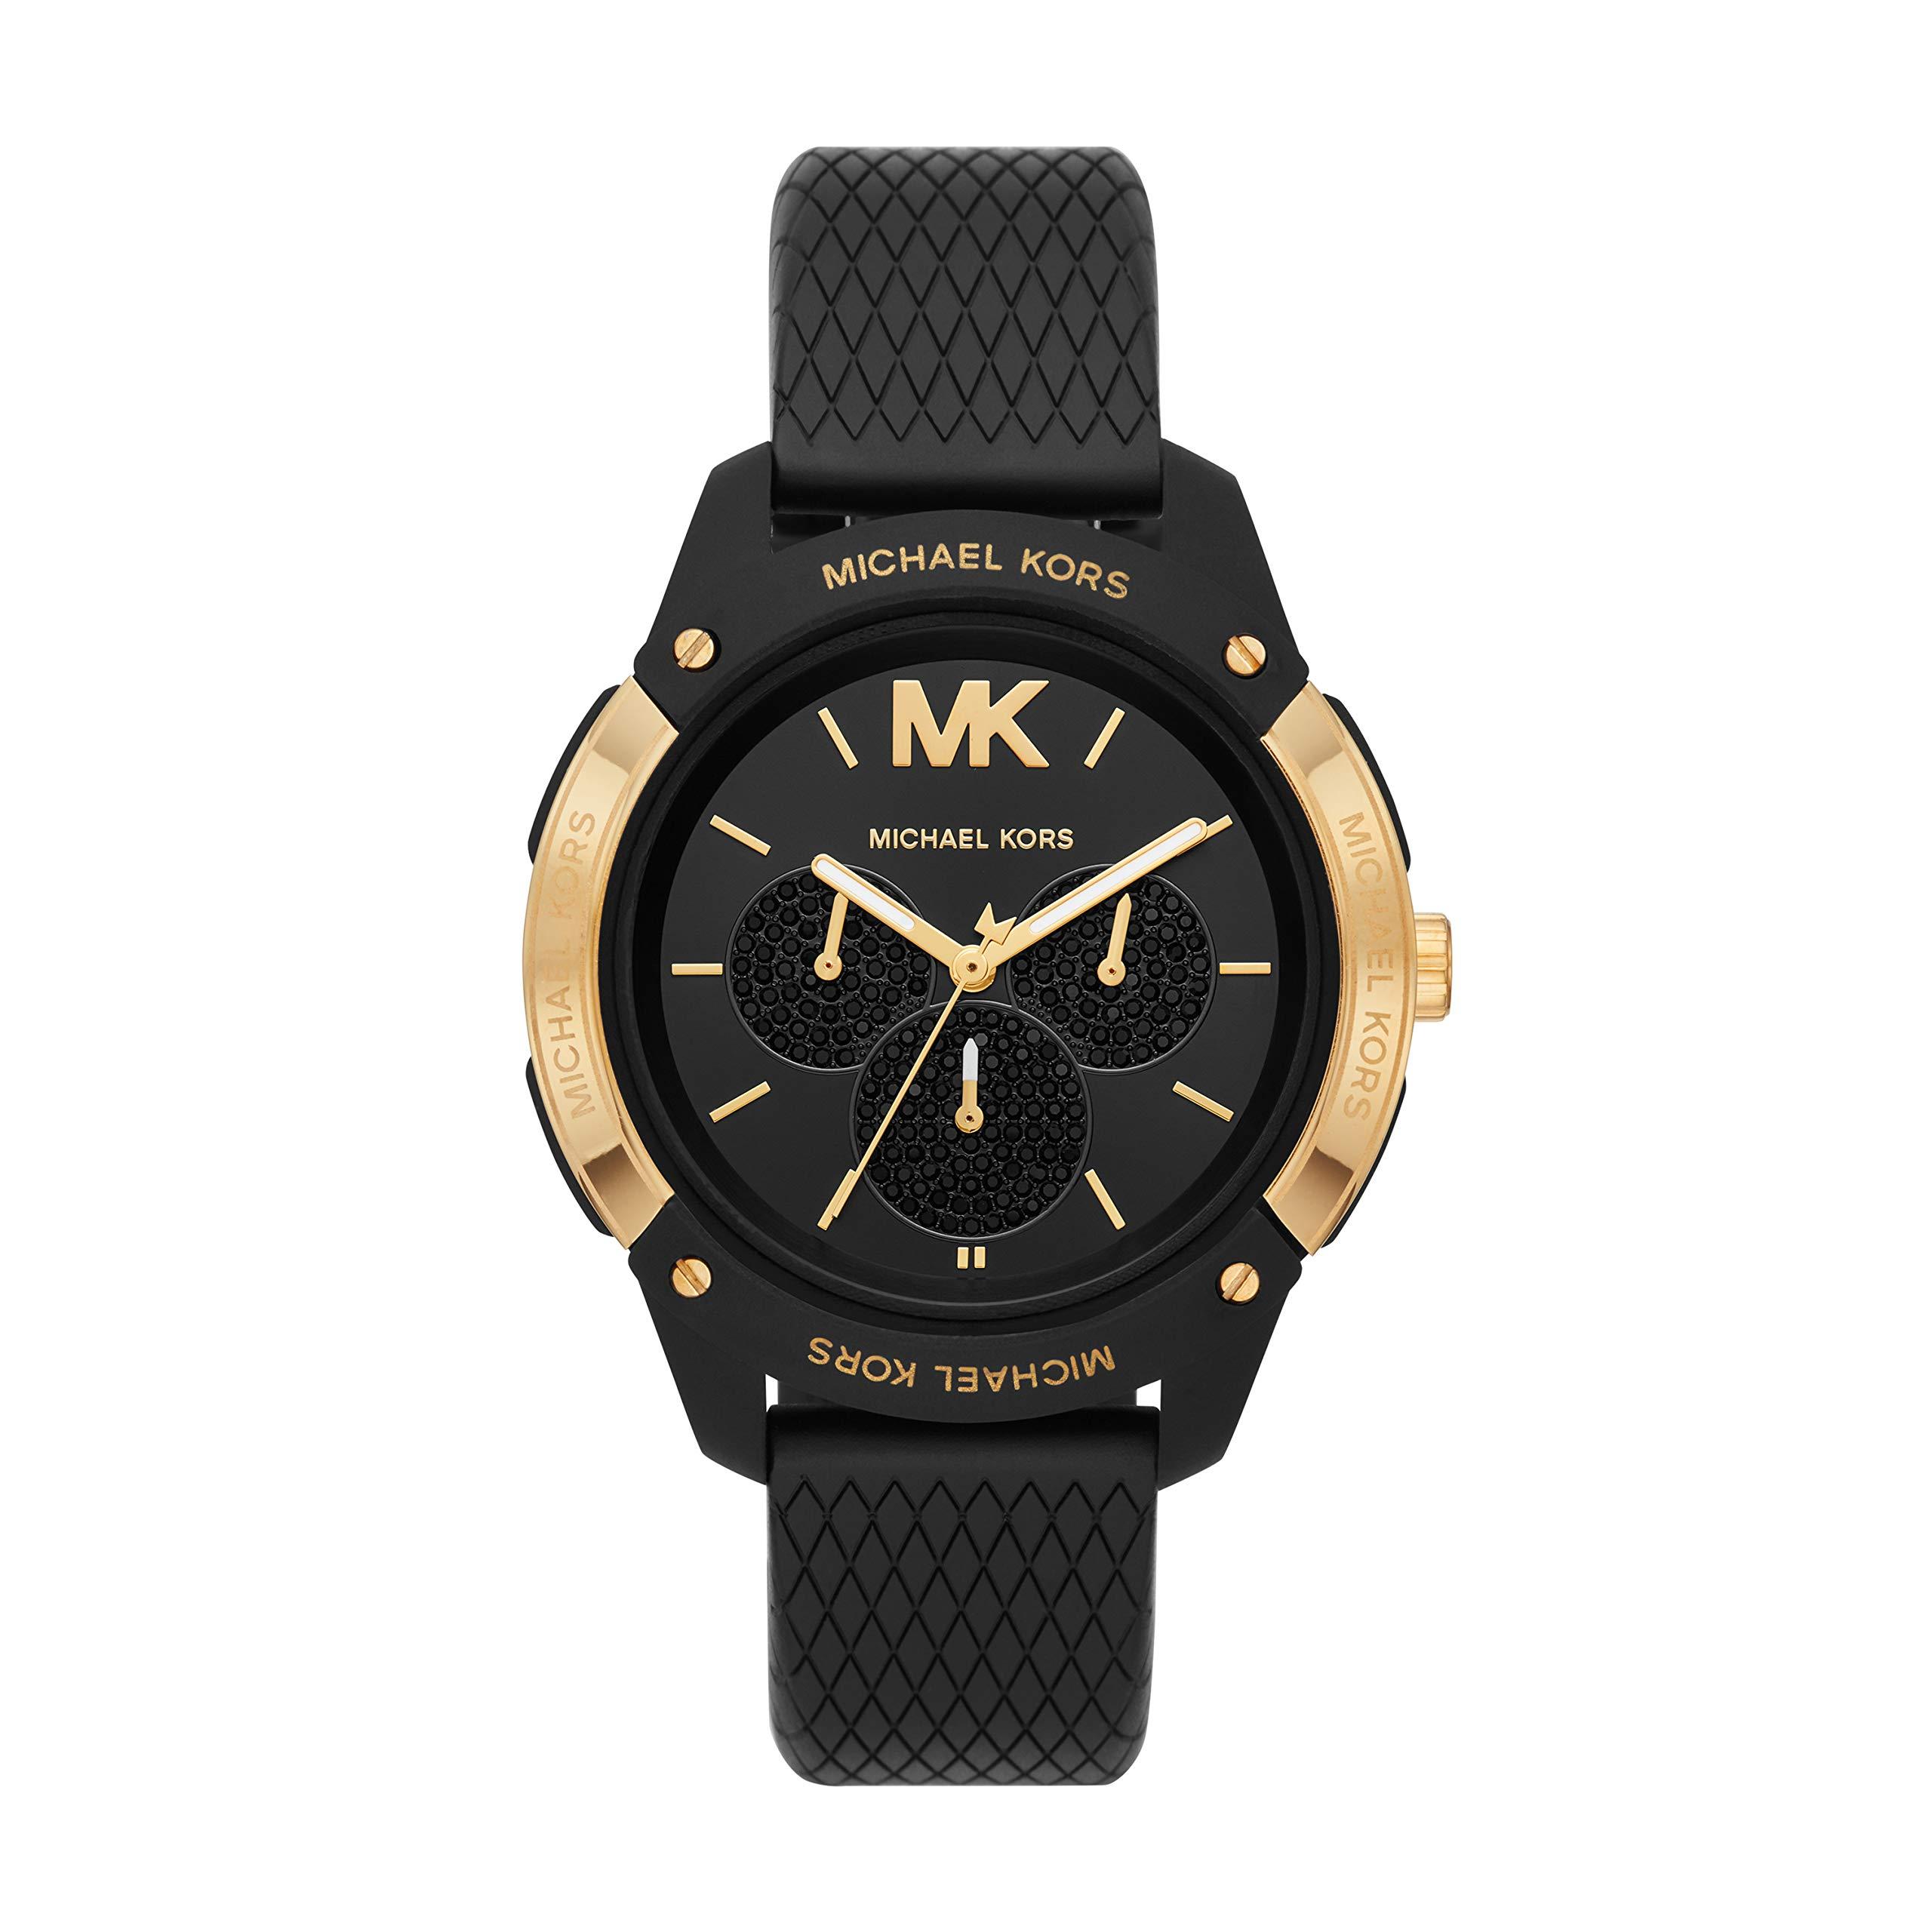 Michael Kors Ryder Stainless Steel Quartz Watch With Rubber Strap 